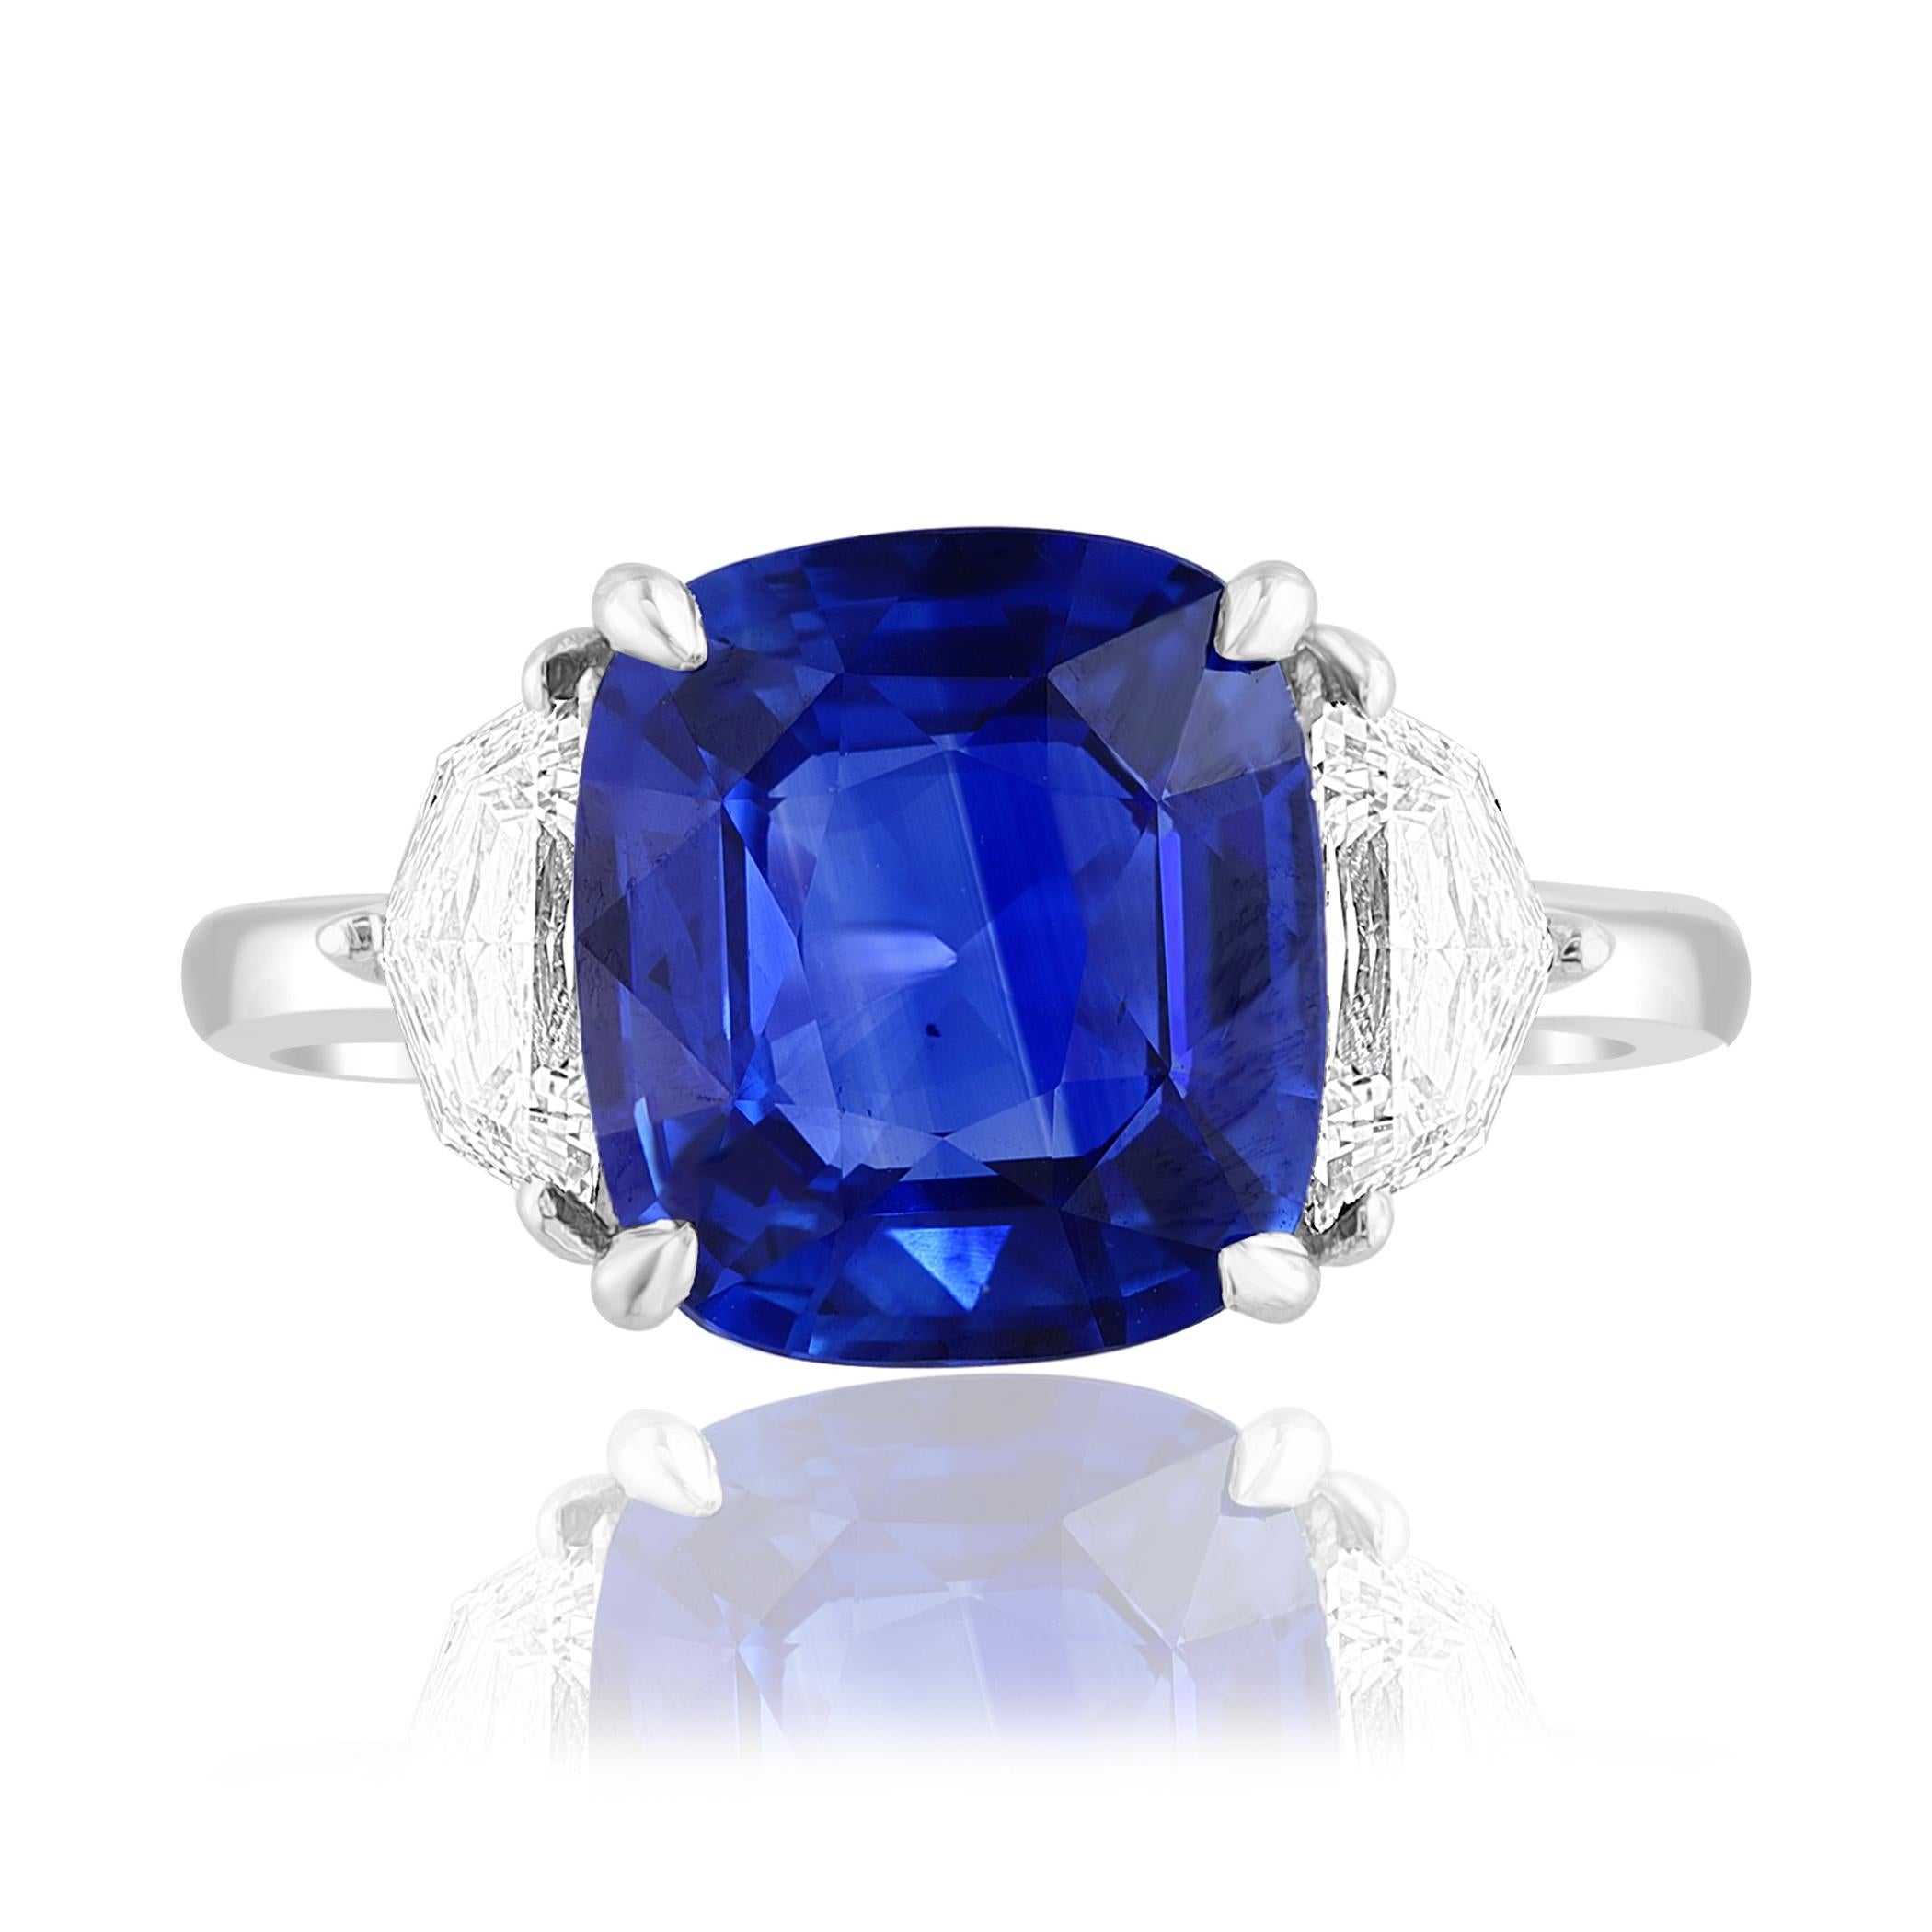 Showcasing Certified Cushion cut, Vibrant color Blue Sapphire weighing 4.15 carats, flanked by two brilliant cut half moon diamonds weighing 0.70 carats total. Elegantly set in a polished platinum composition.